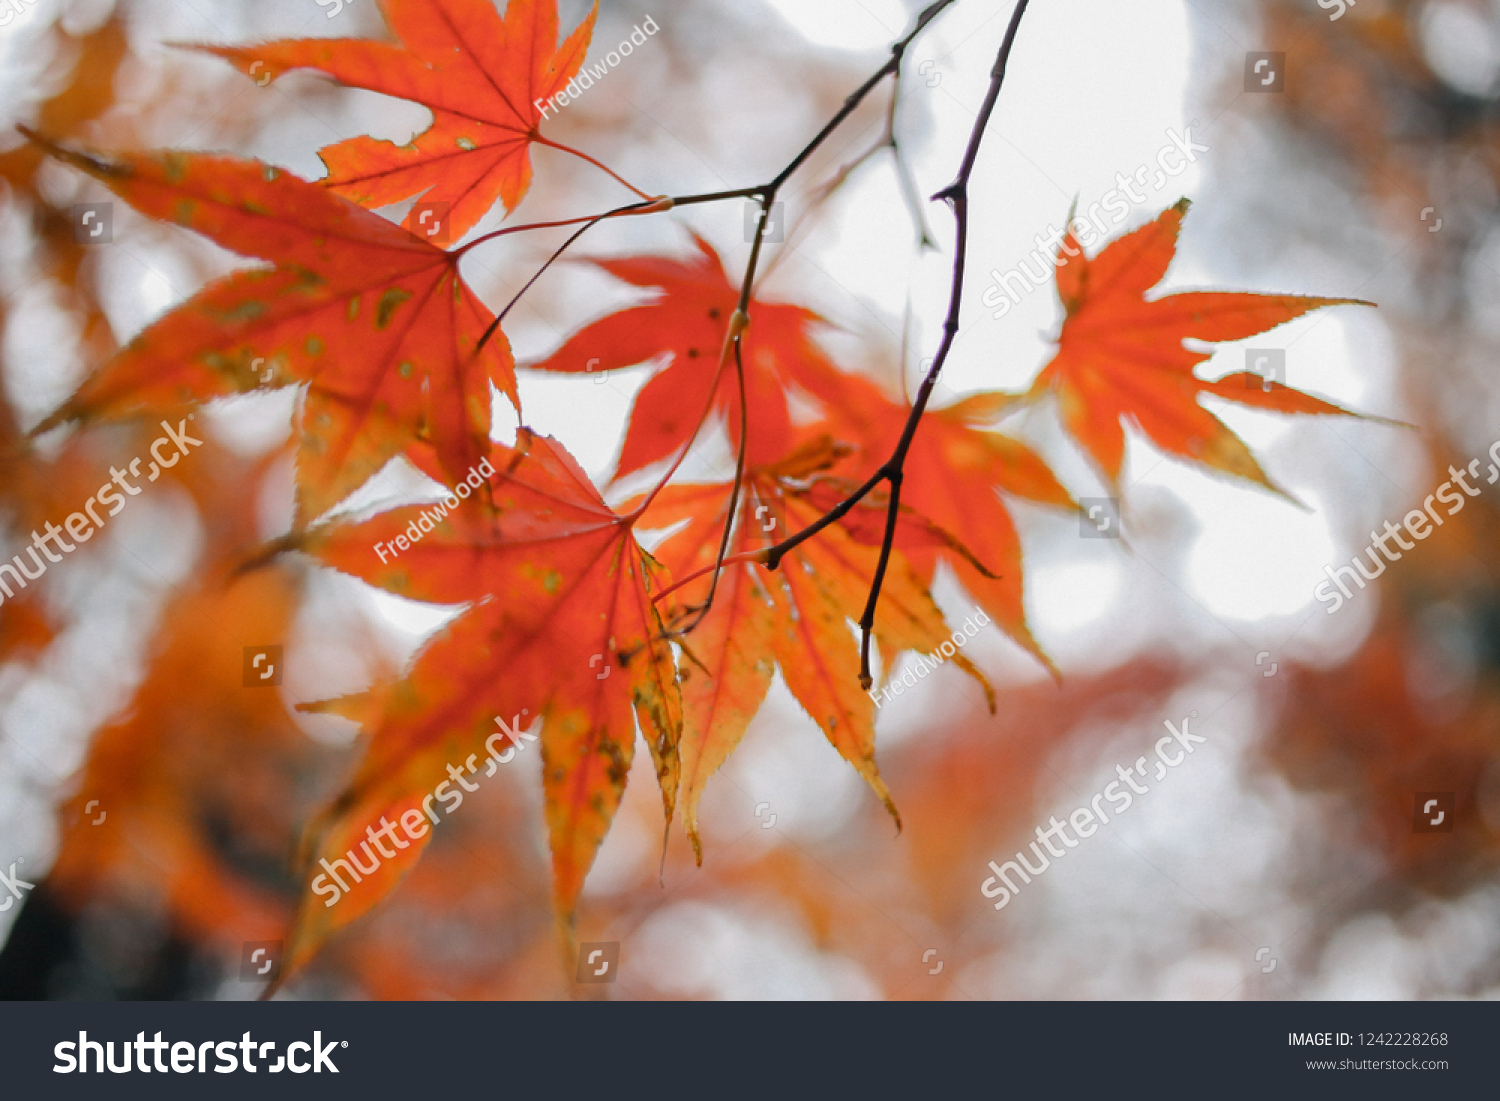 Red maple leaf #1242228268